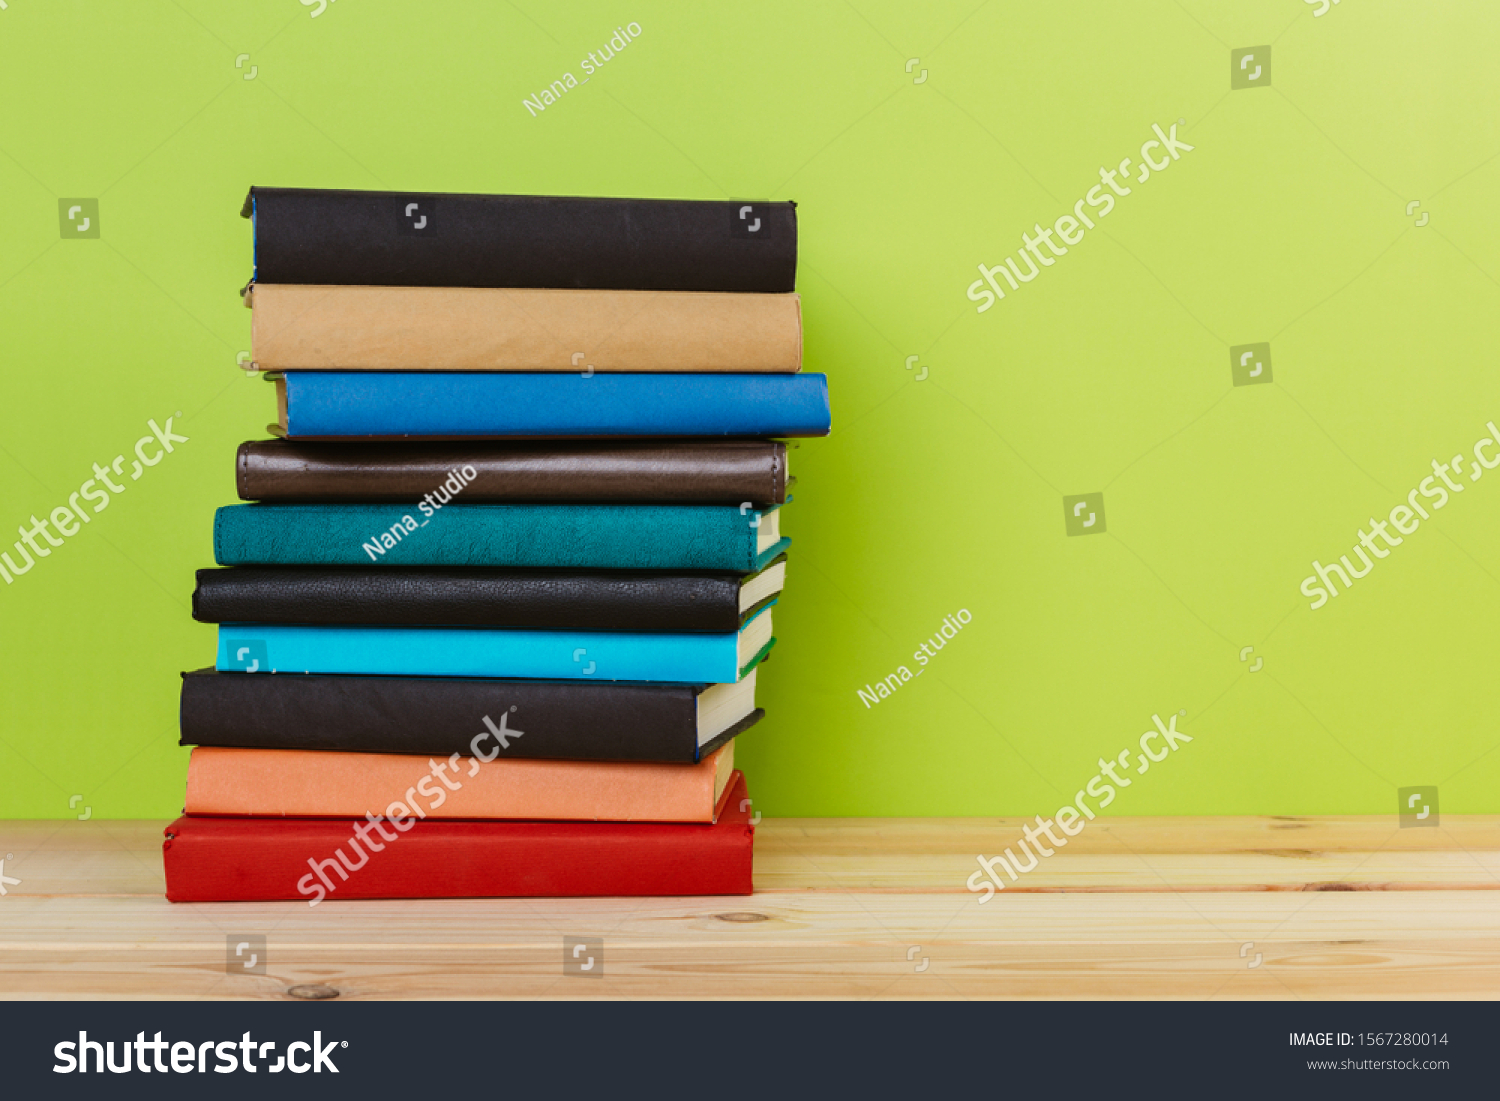 Simple Simple composition of many hardback books, unprocessed books on a wooden table and a green background. back to school. Copy space. Education. #1567280014